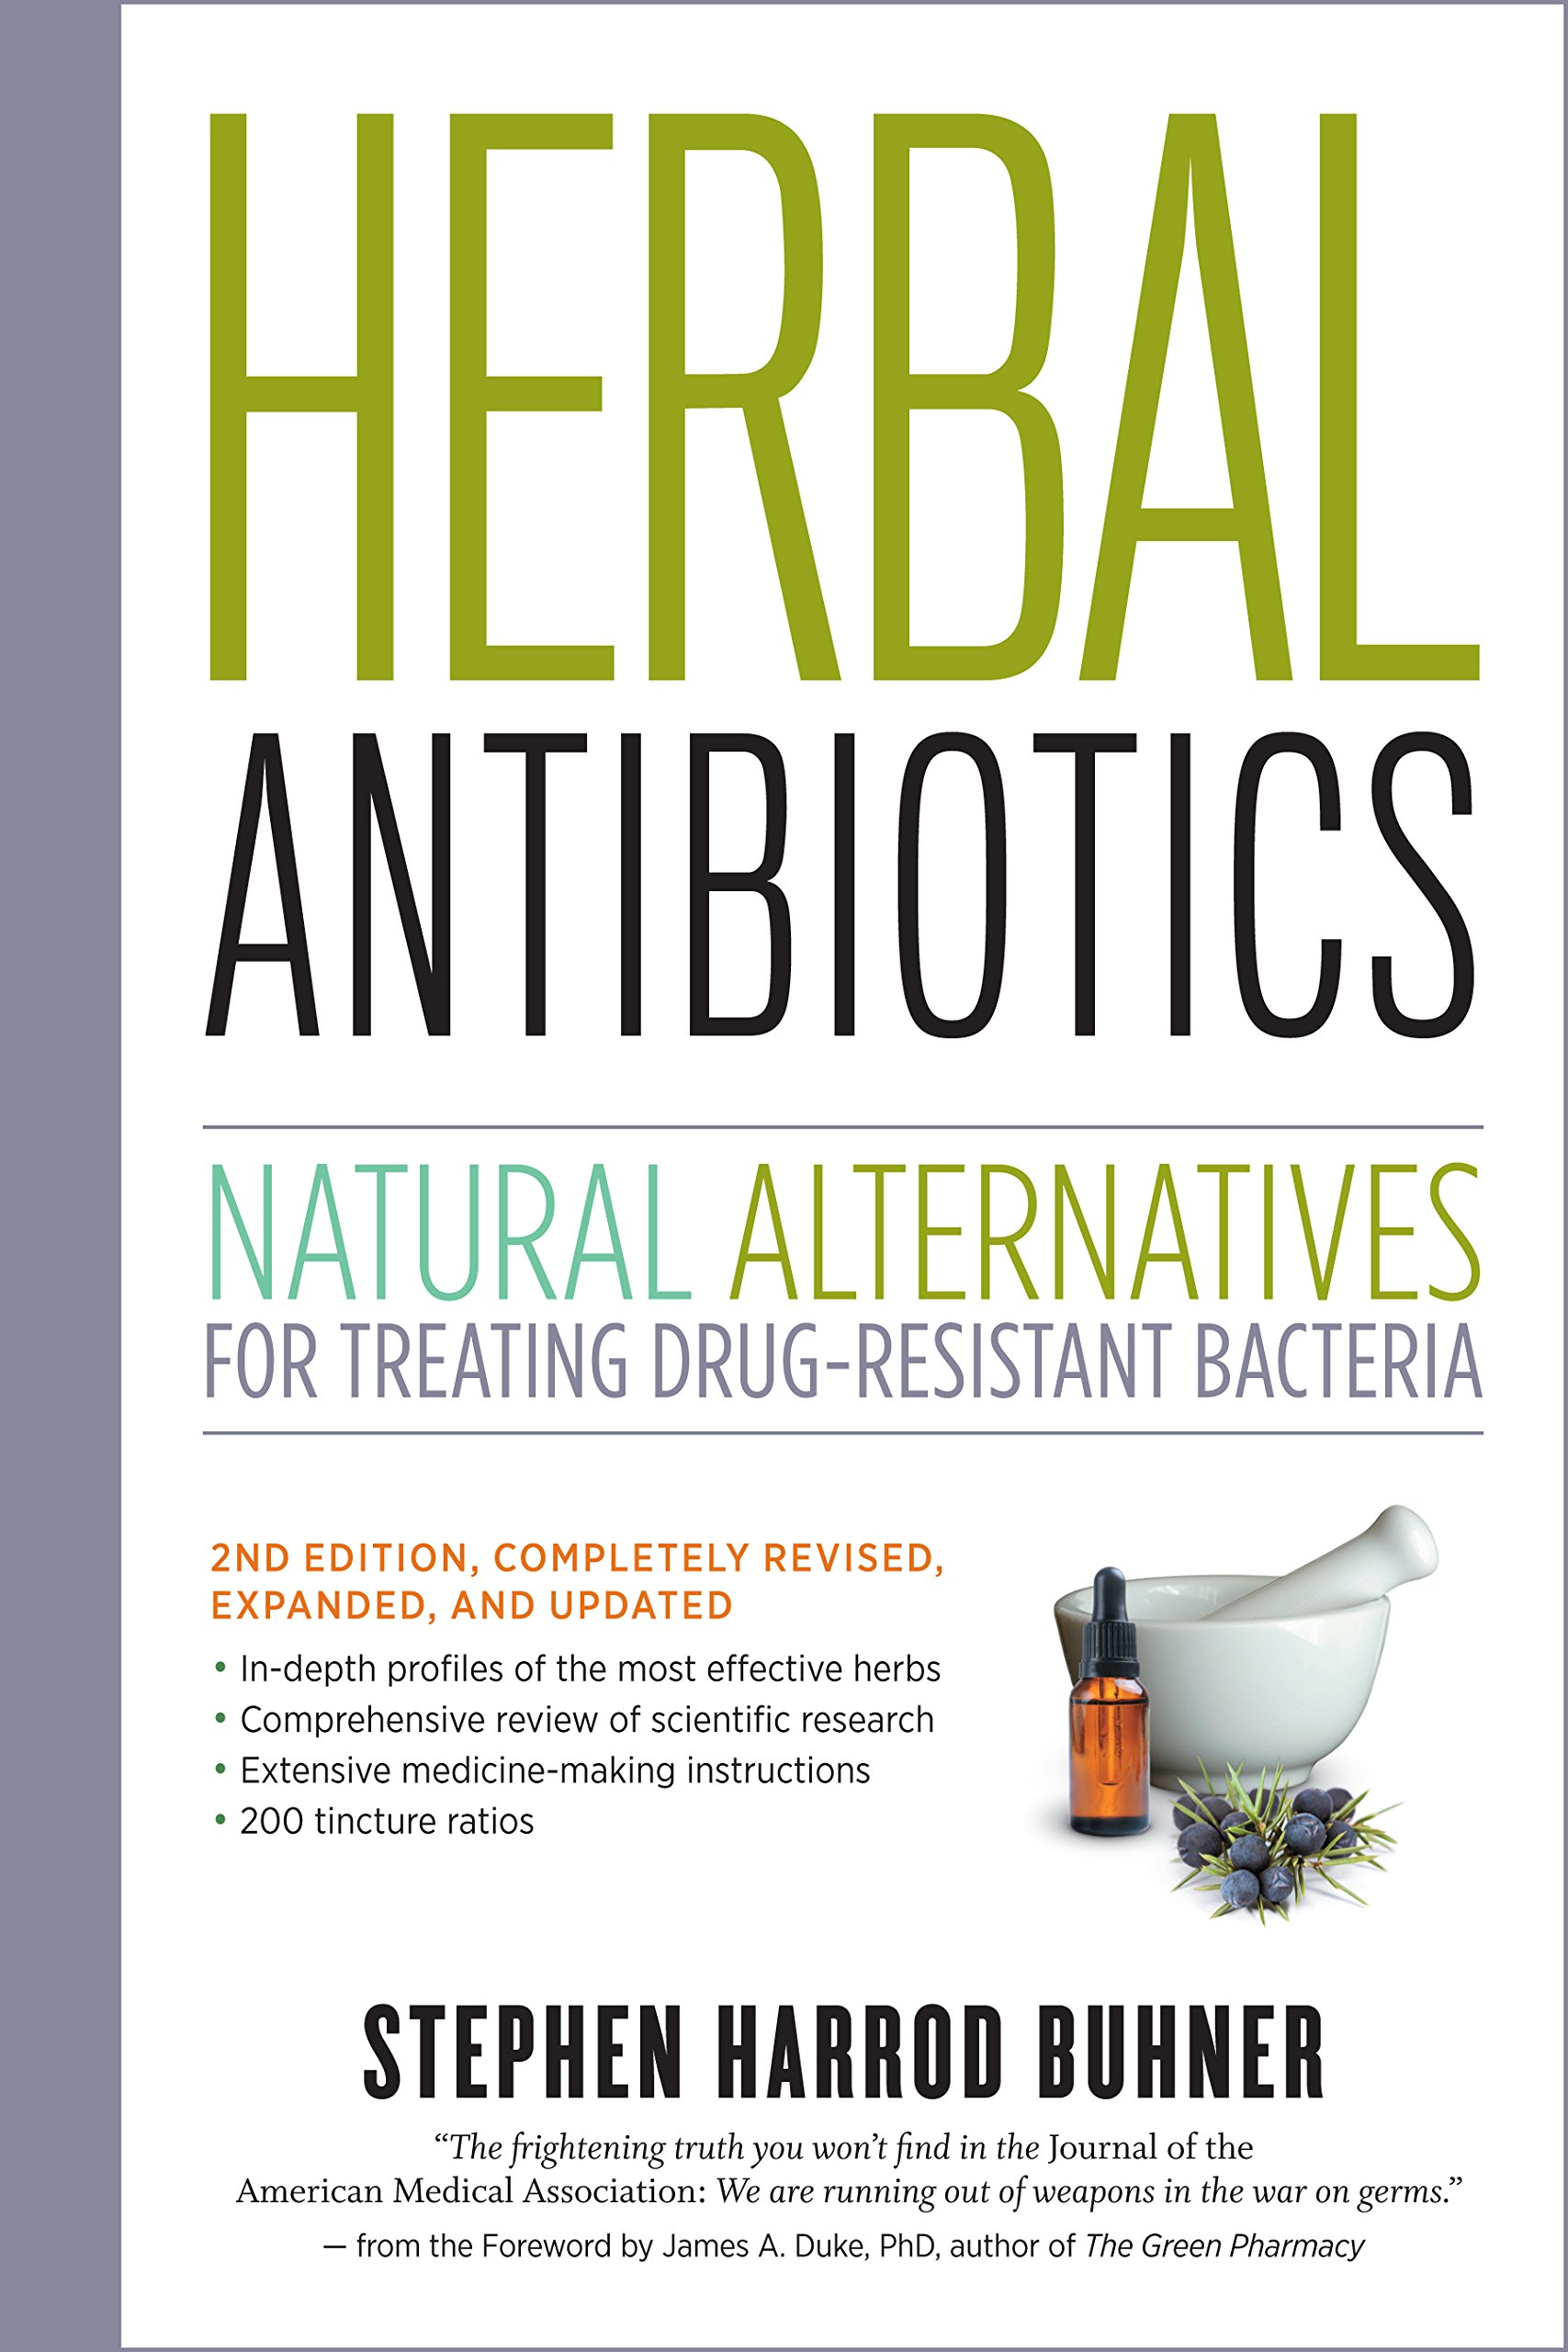 Herbal Antibiotics: When the SHTF, You Will Need This Book